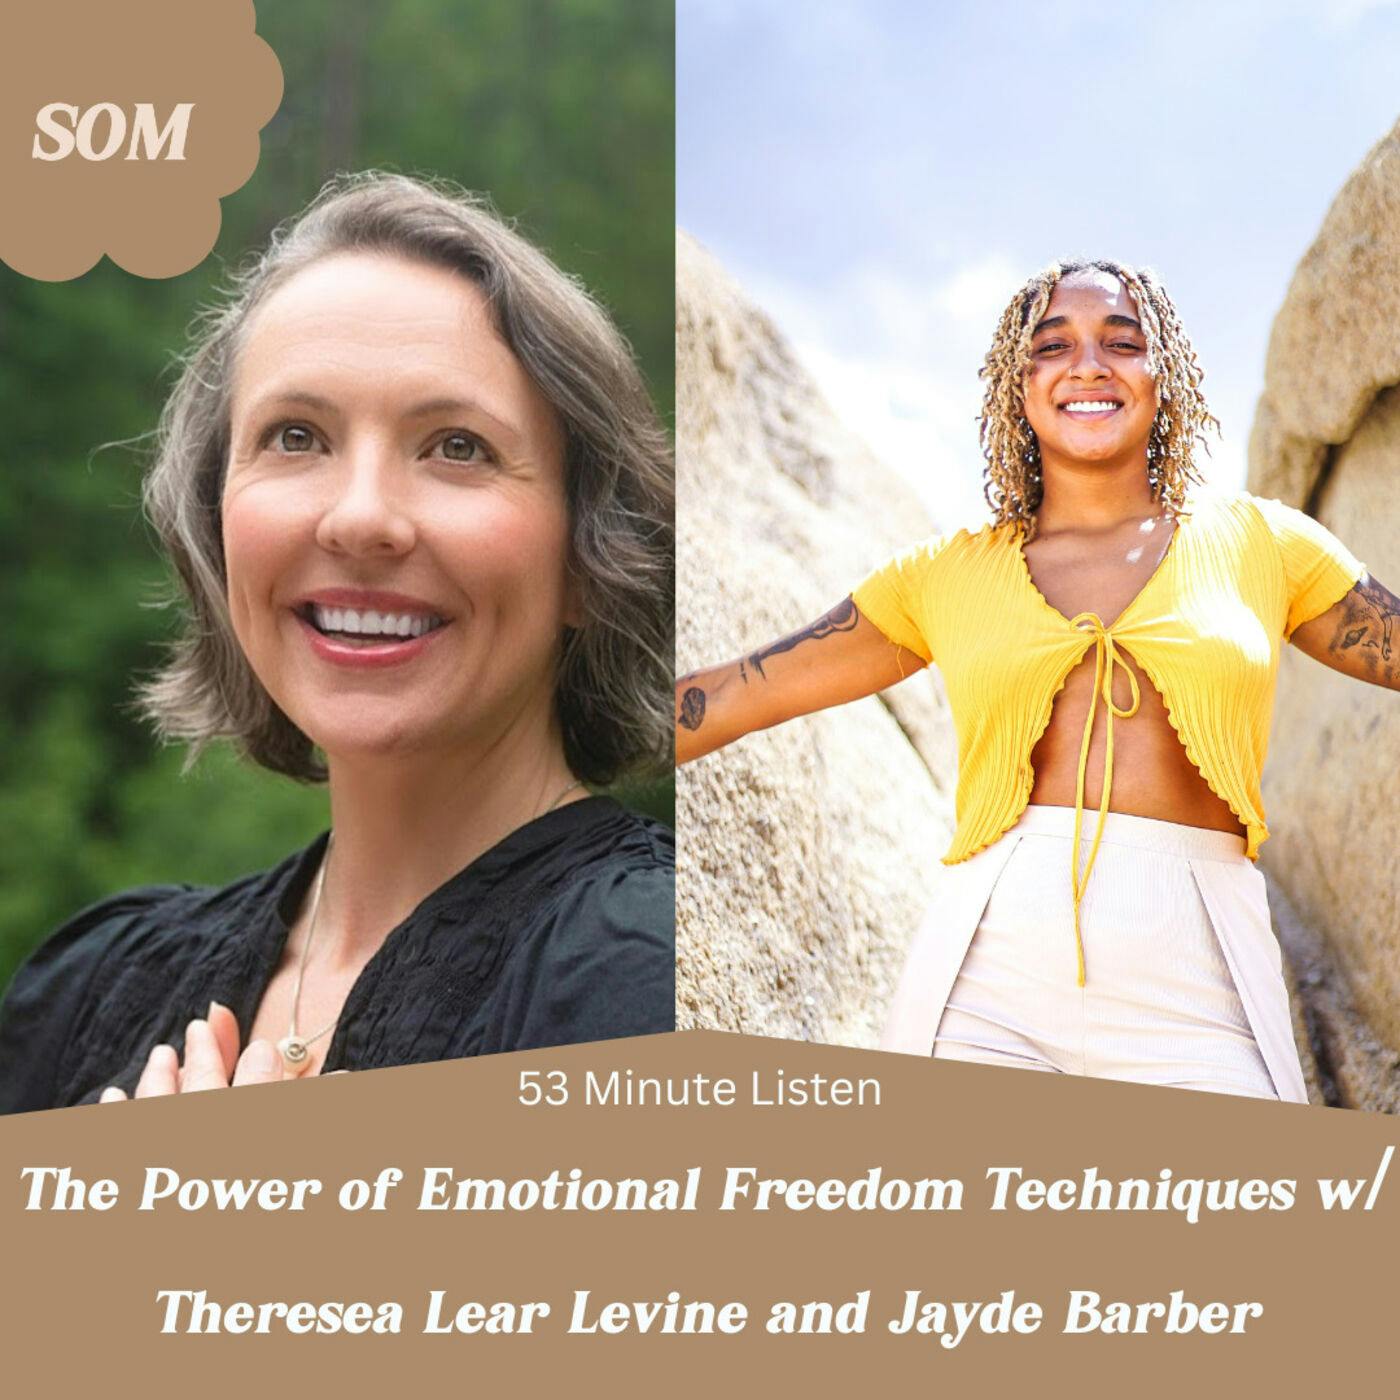 The Power of Emotional Freedom Techniques w/ Theresa Lear Levine and Jayde Barber